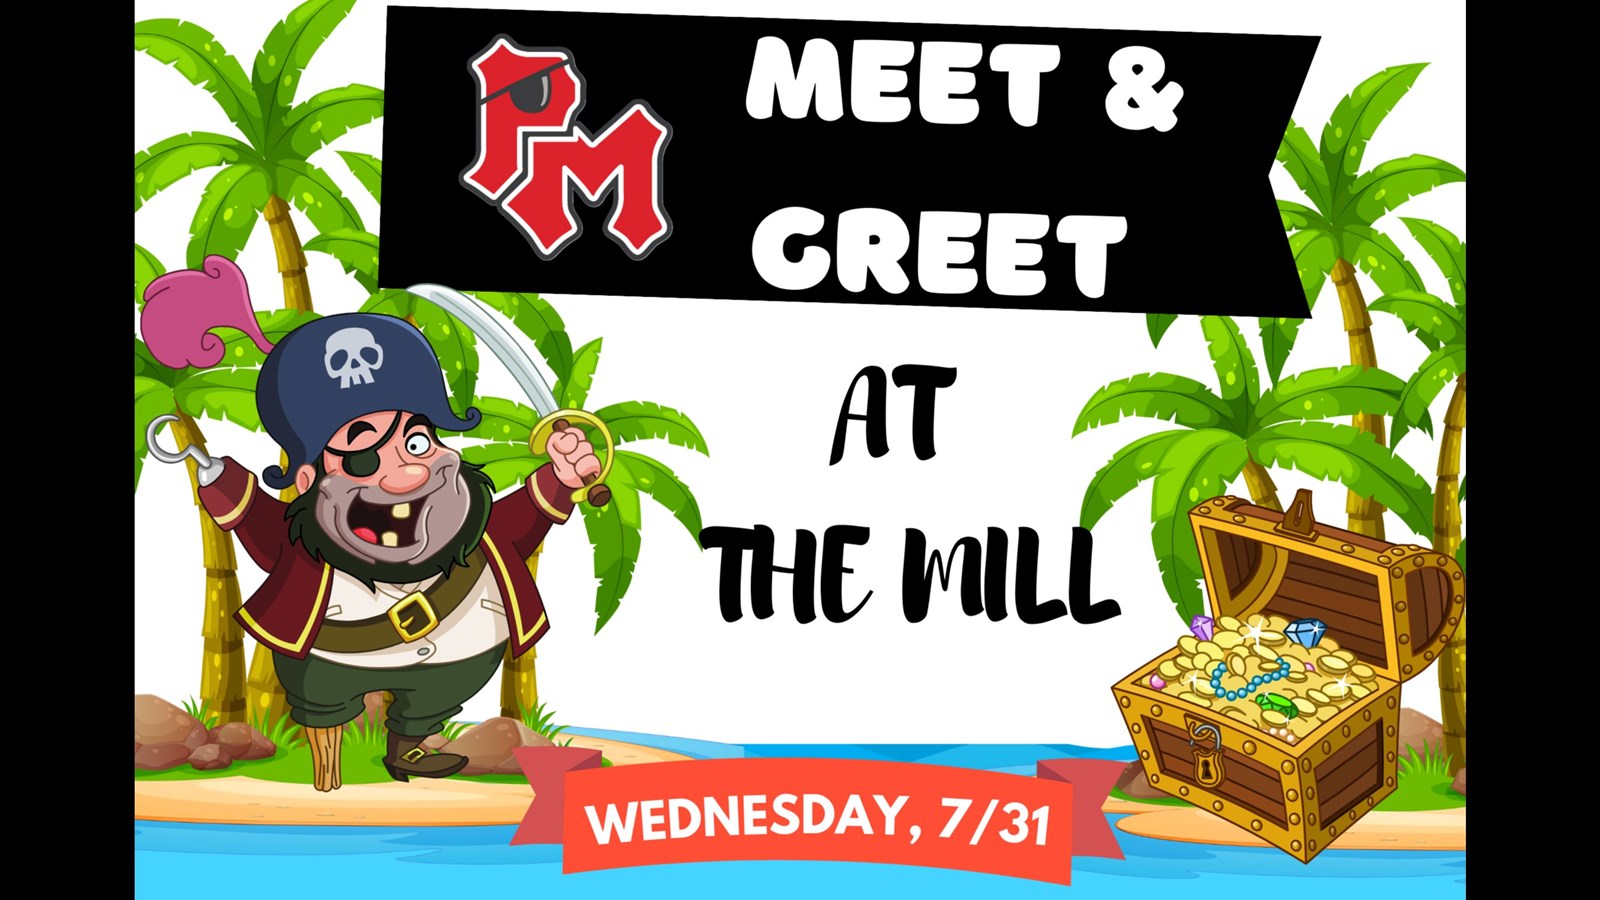 Image of a pirate and the words Meet and Greet at the Mill Wednesday, 7.31